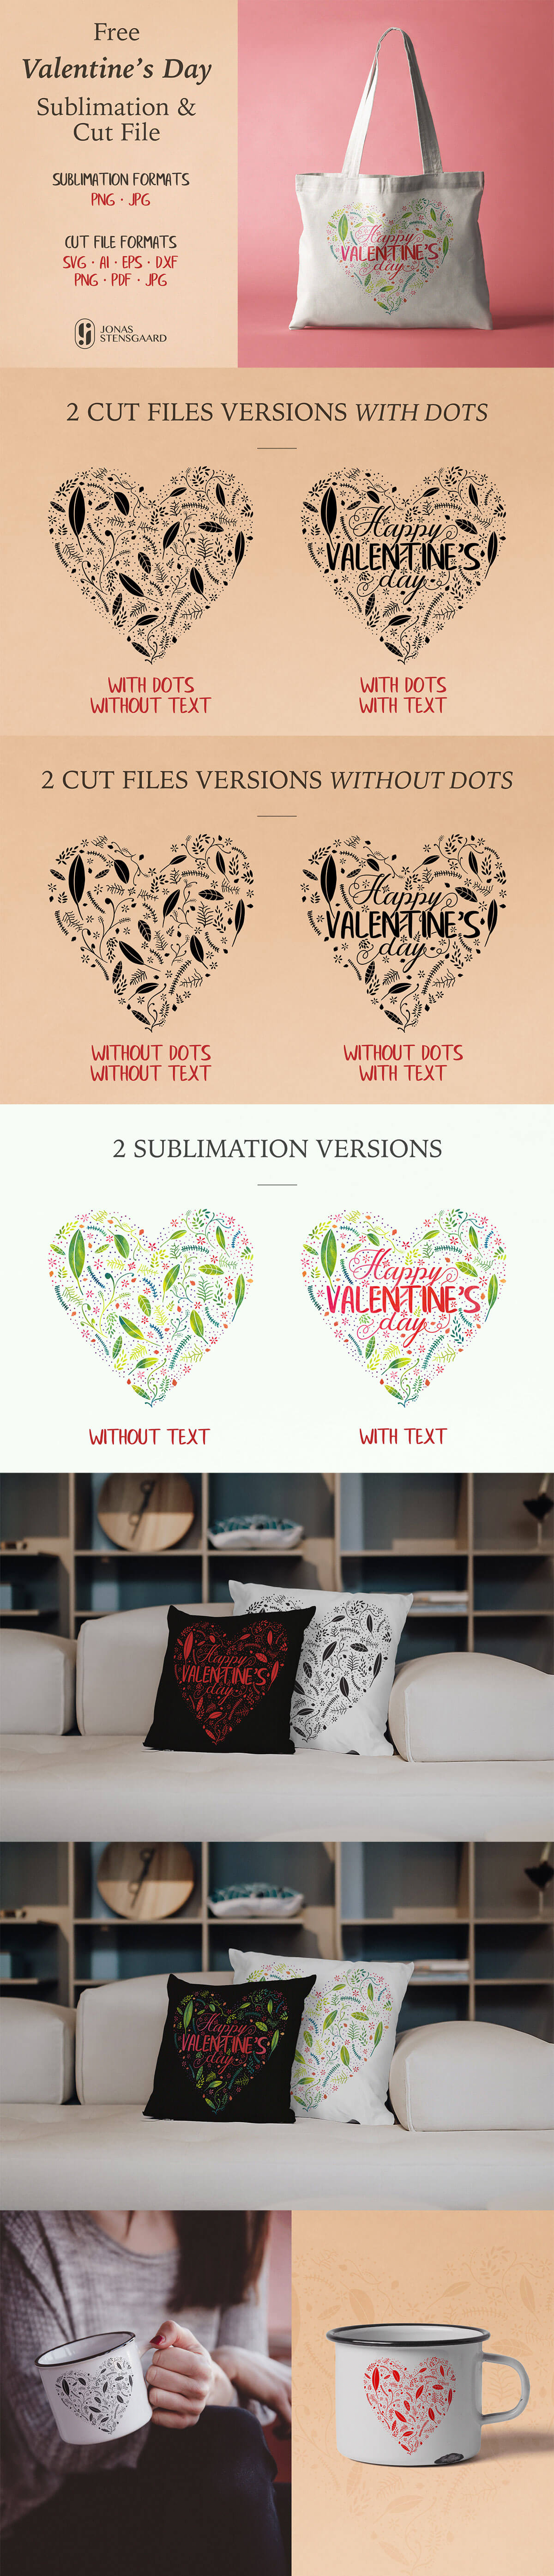 Free Valentines Day Sublimation Clipart